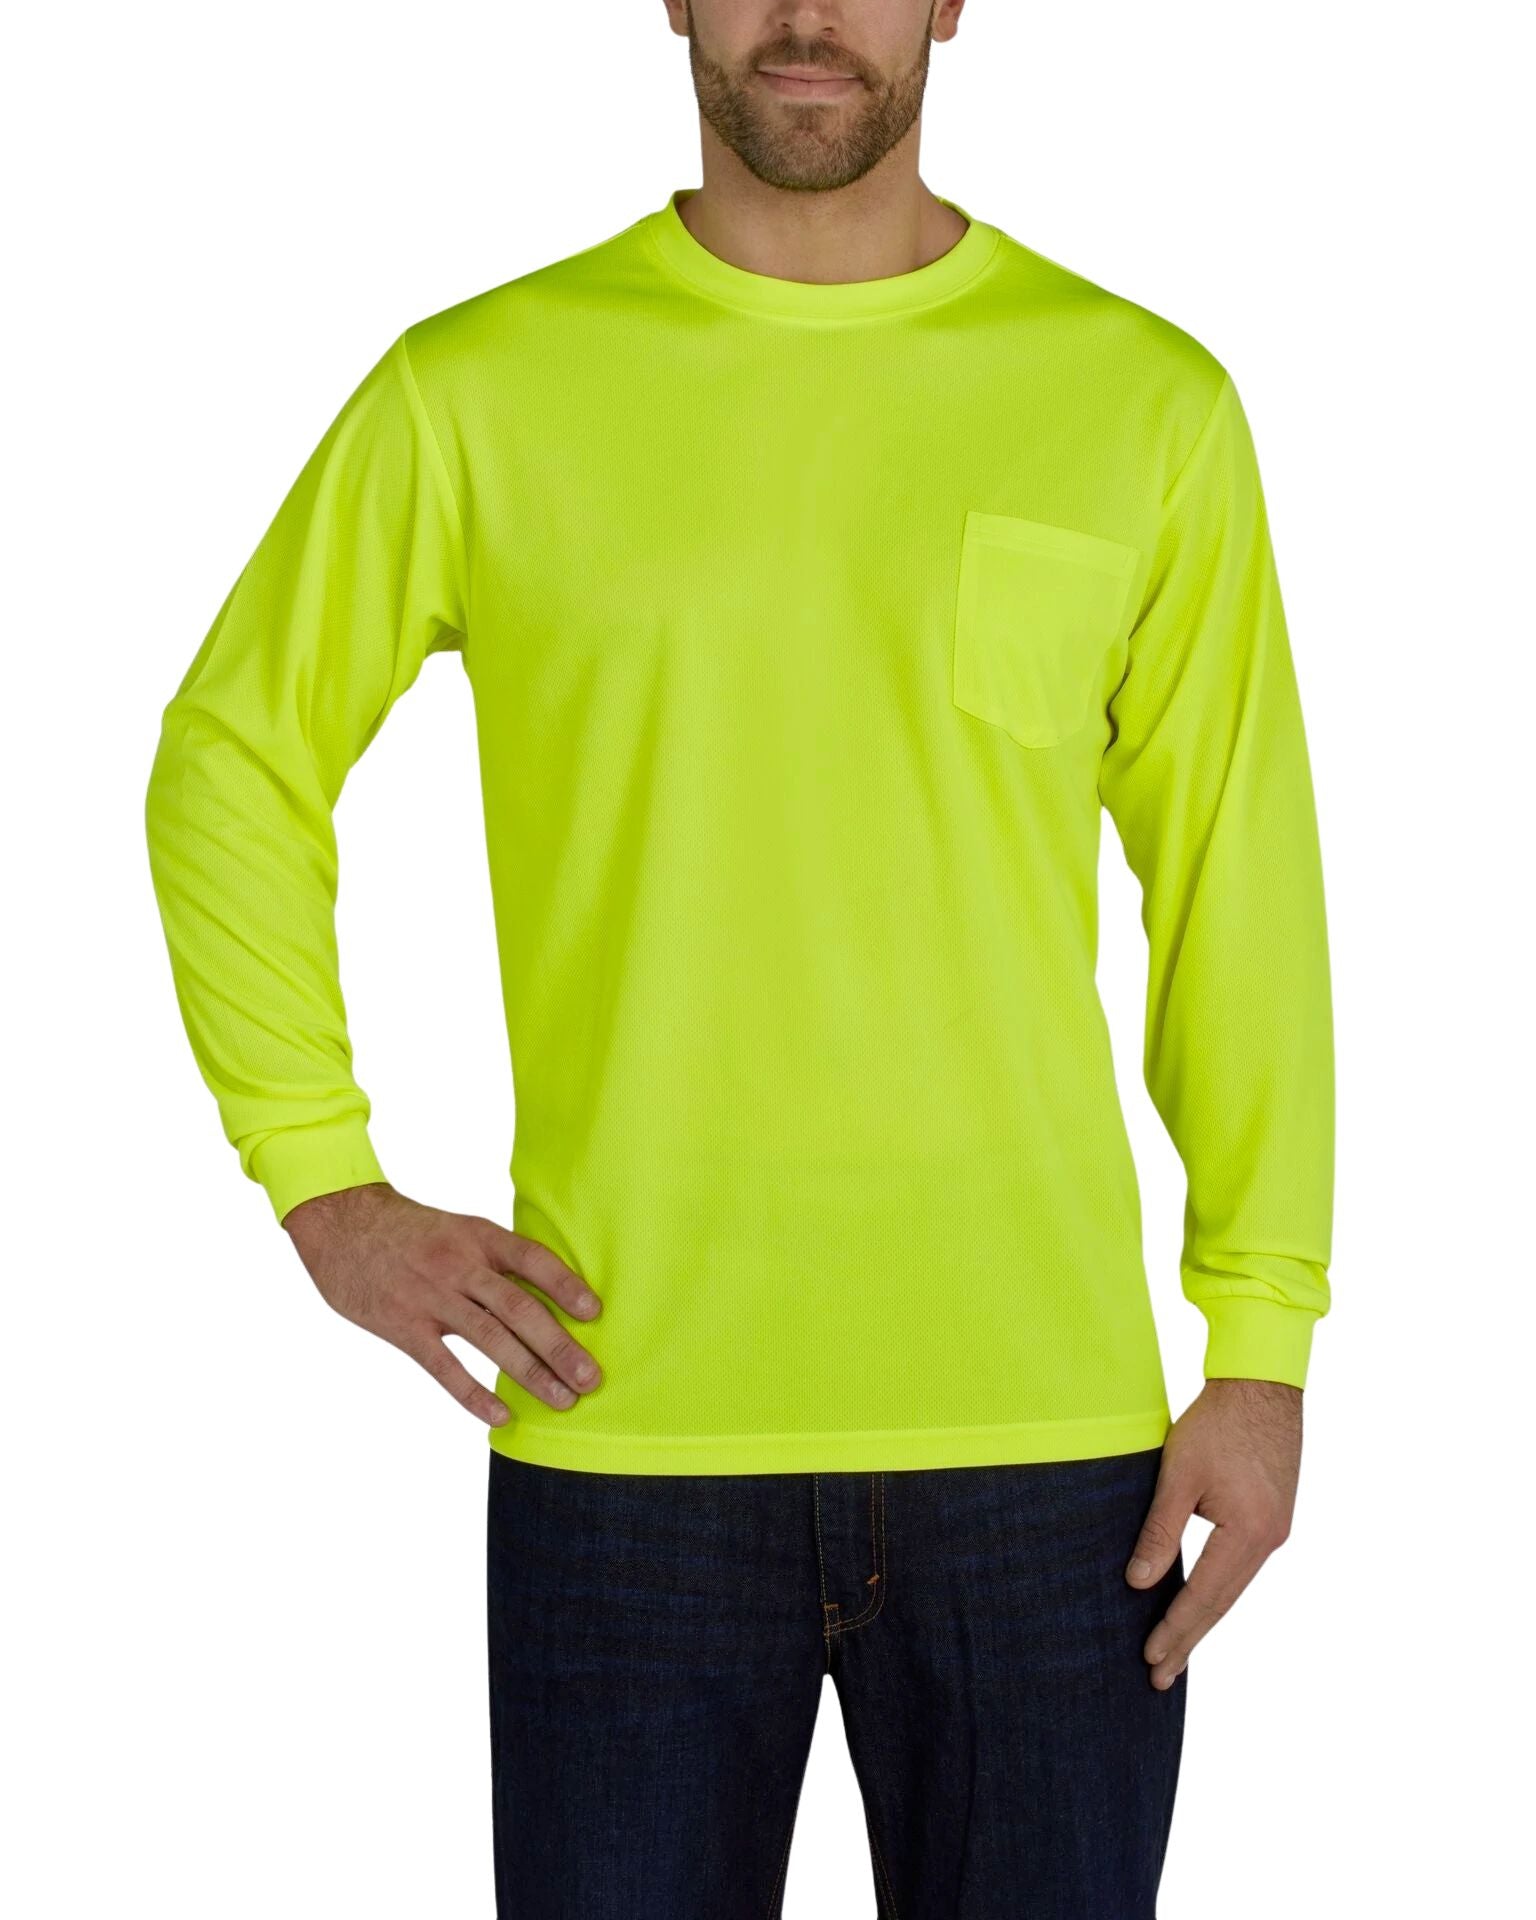 UHV856 Long Sleeve Knit Shirt  - Protected with PERIMETER™ Insect Guard